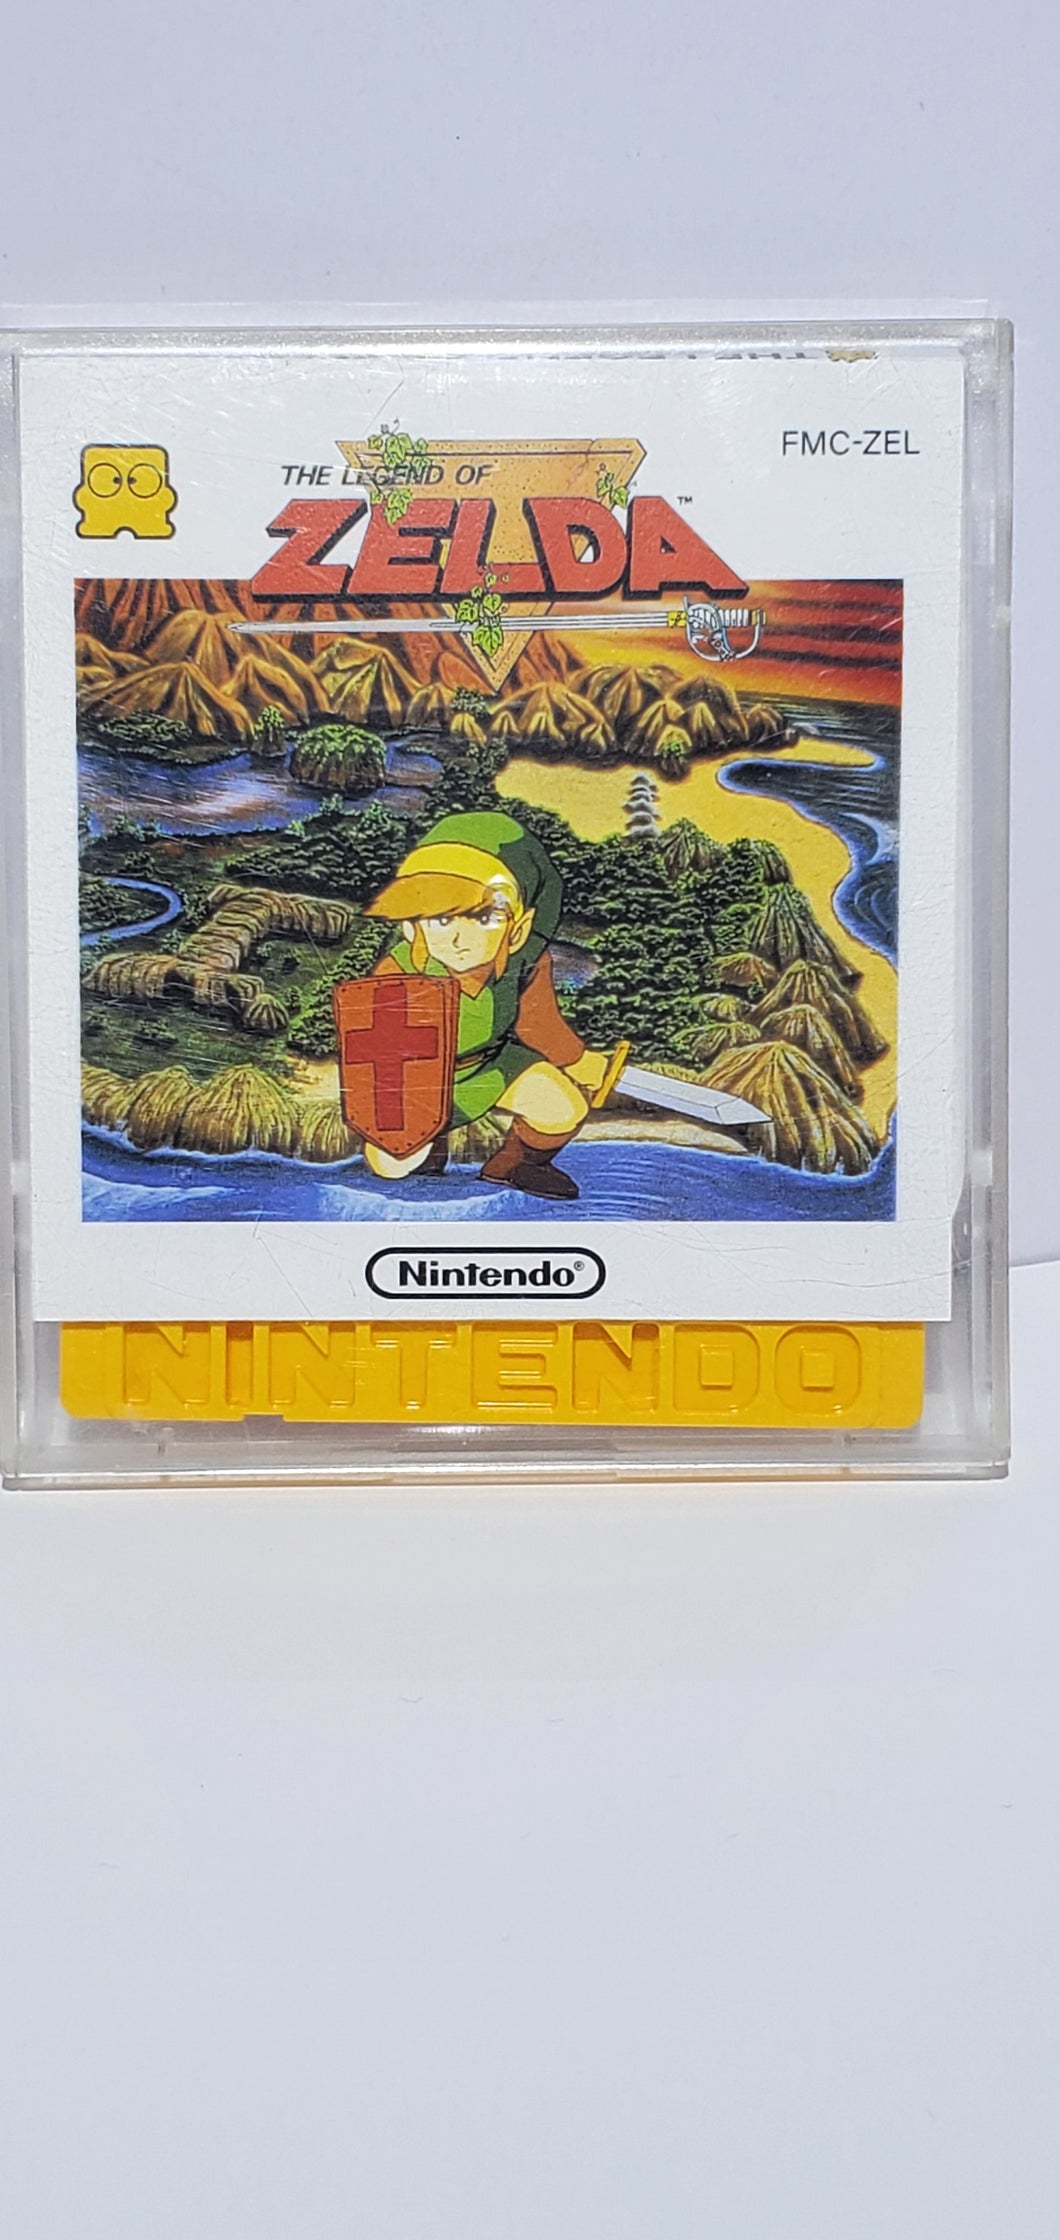 Legend of Zelda Famicom Disc System replacement cover slip (no game included)